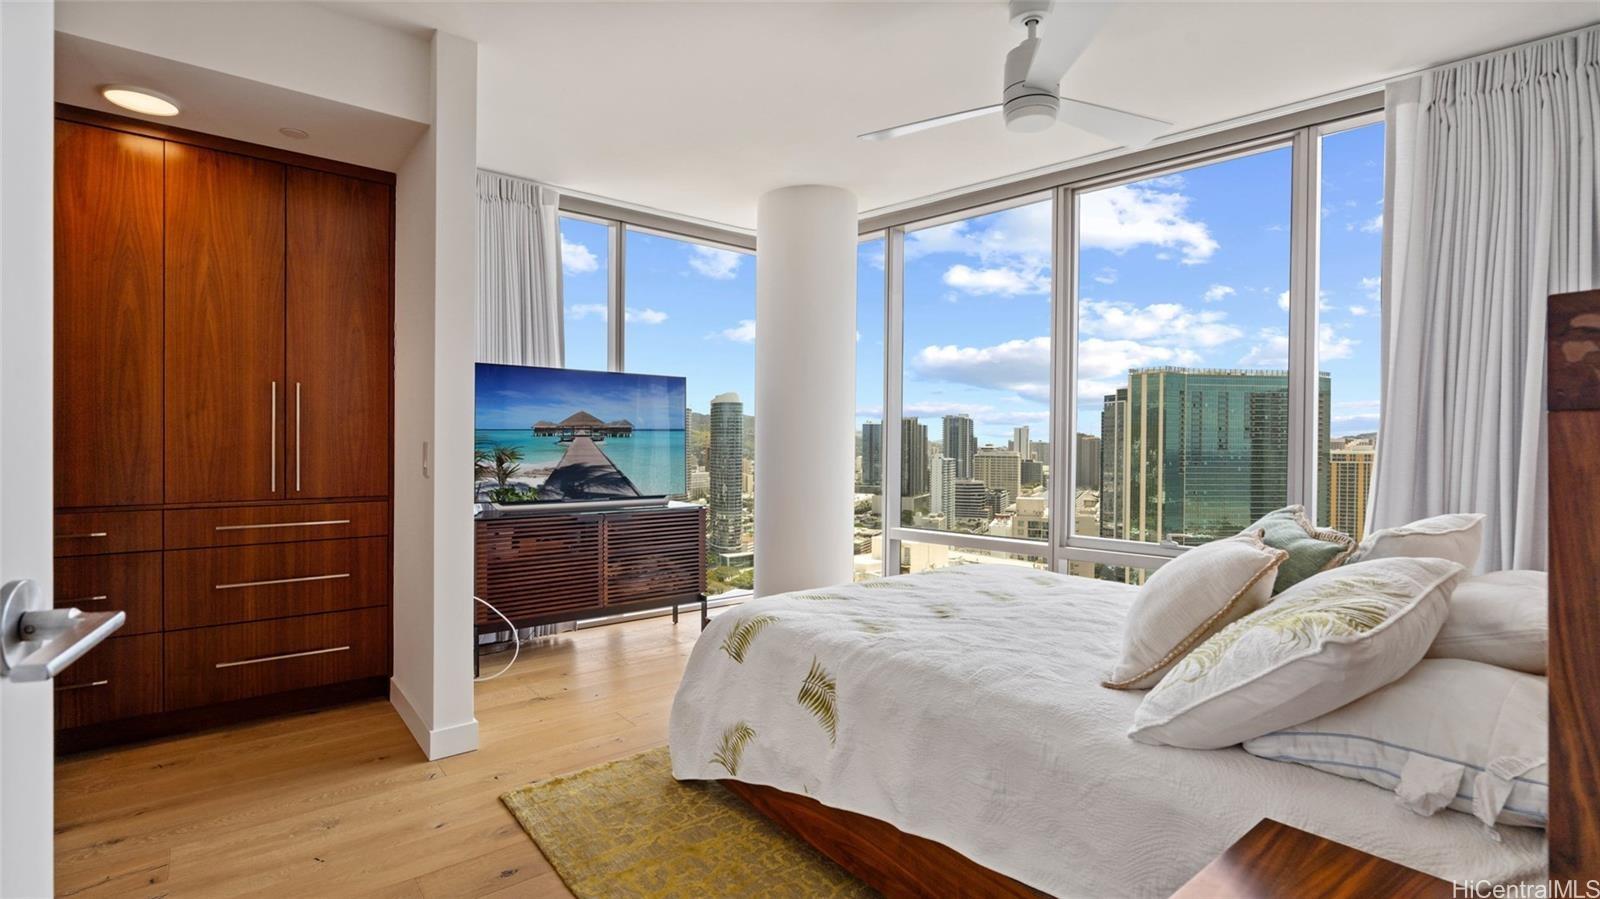 Property Image for 1001 Queen Street 3012